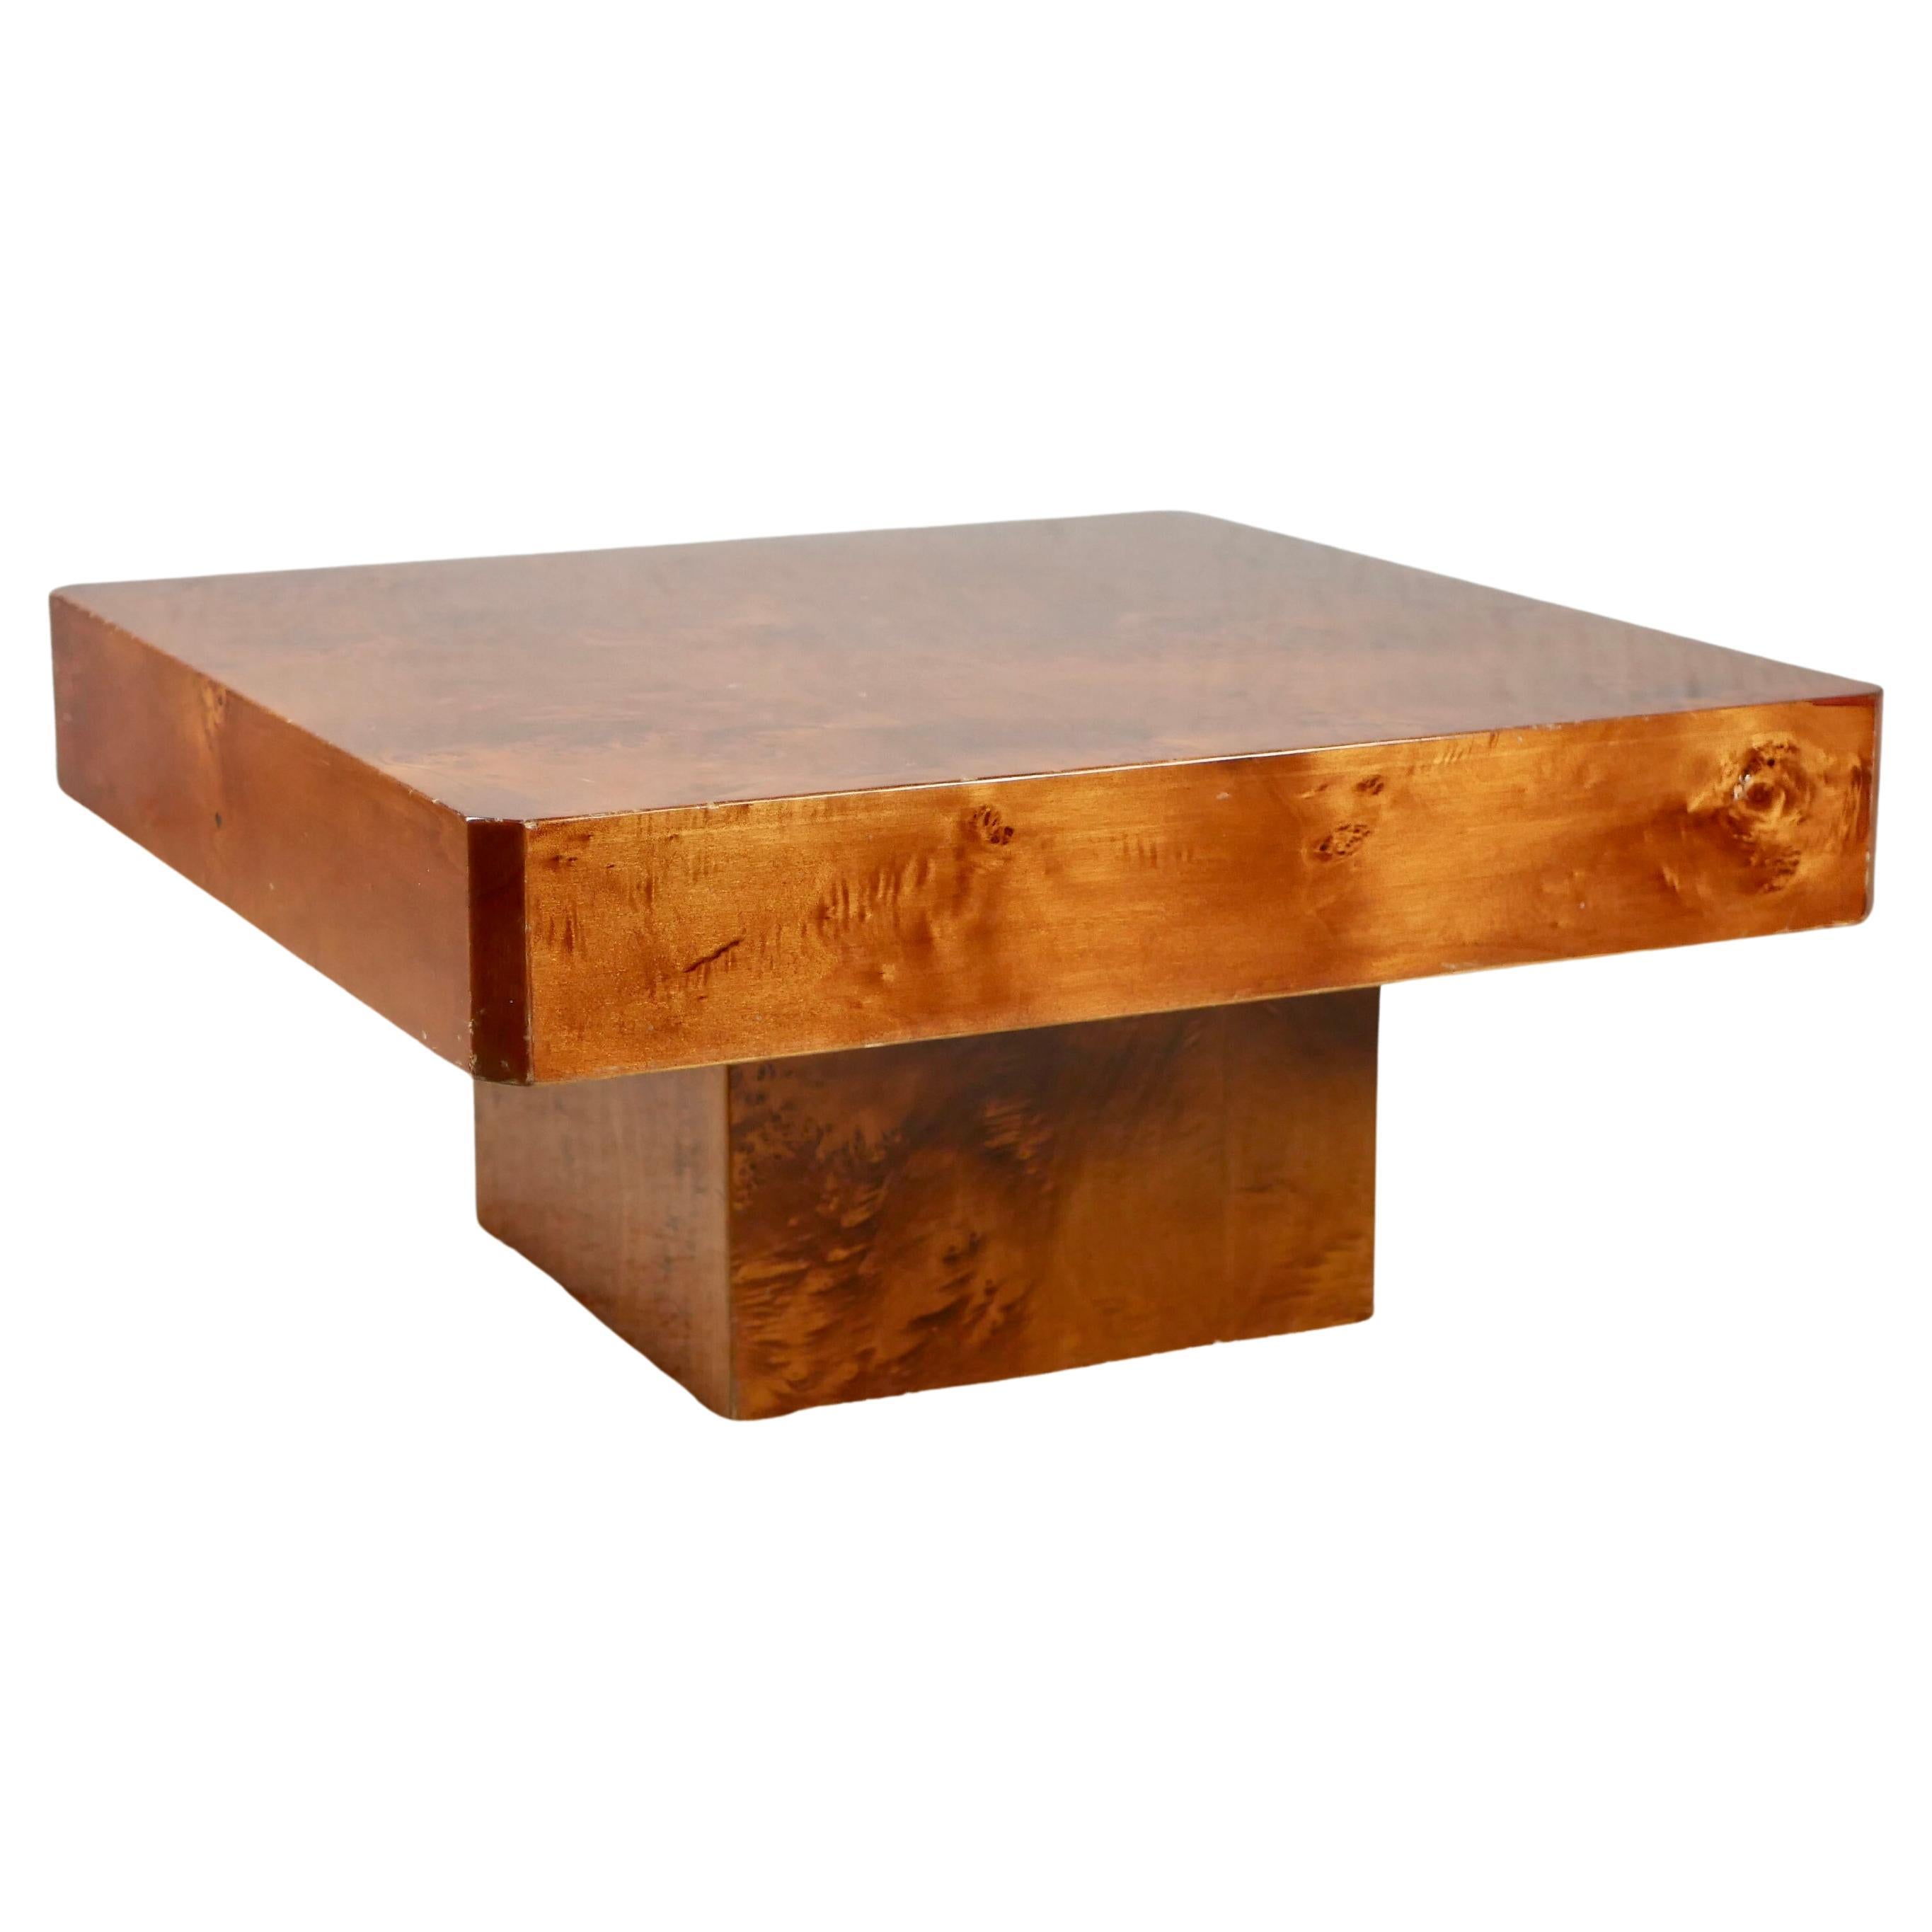 Square Burl Wood Coffee Table by Roche Bobois, 1980s